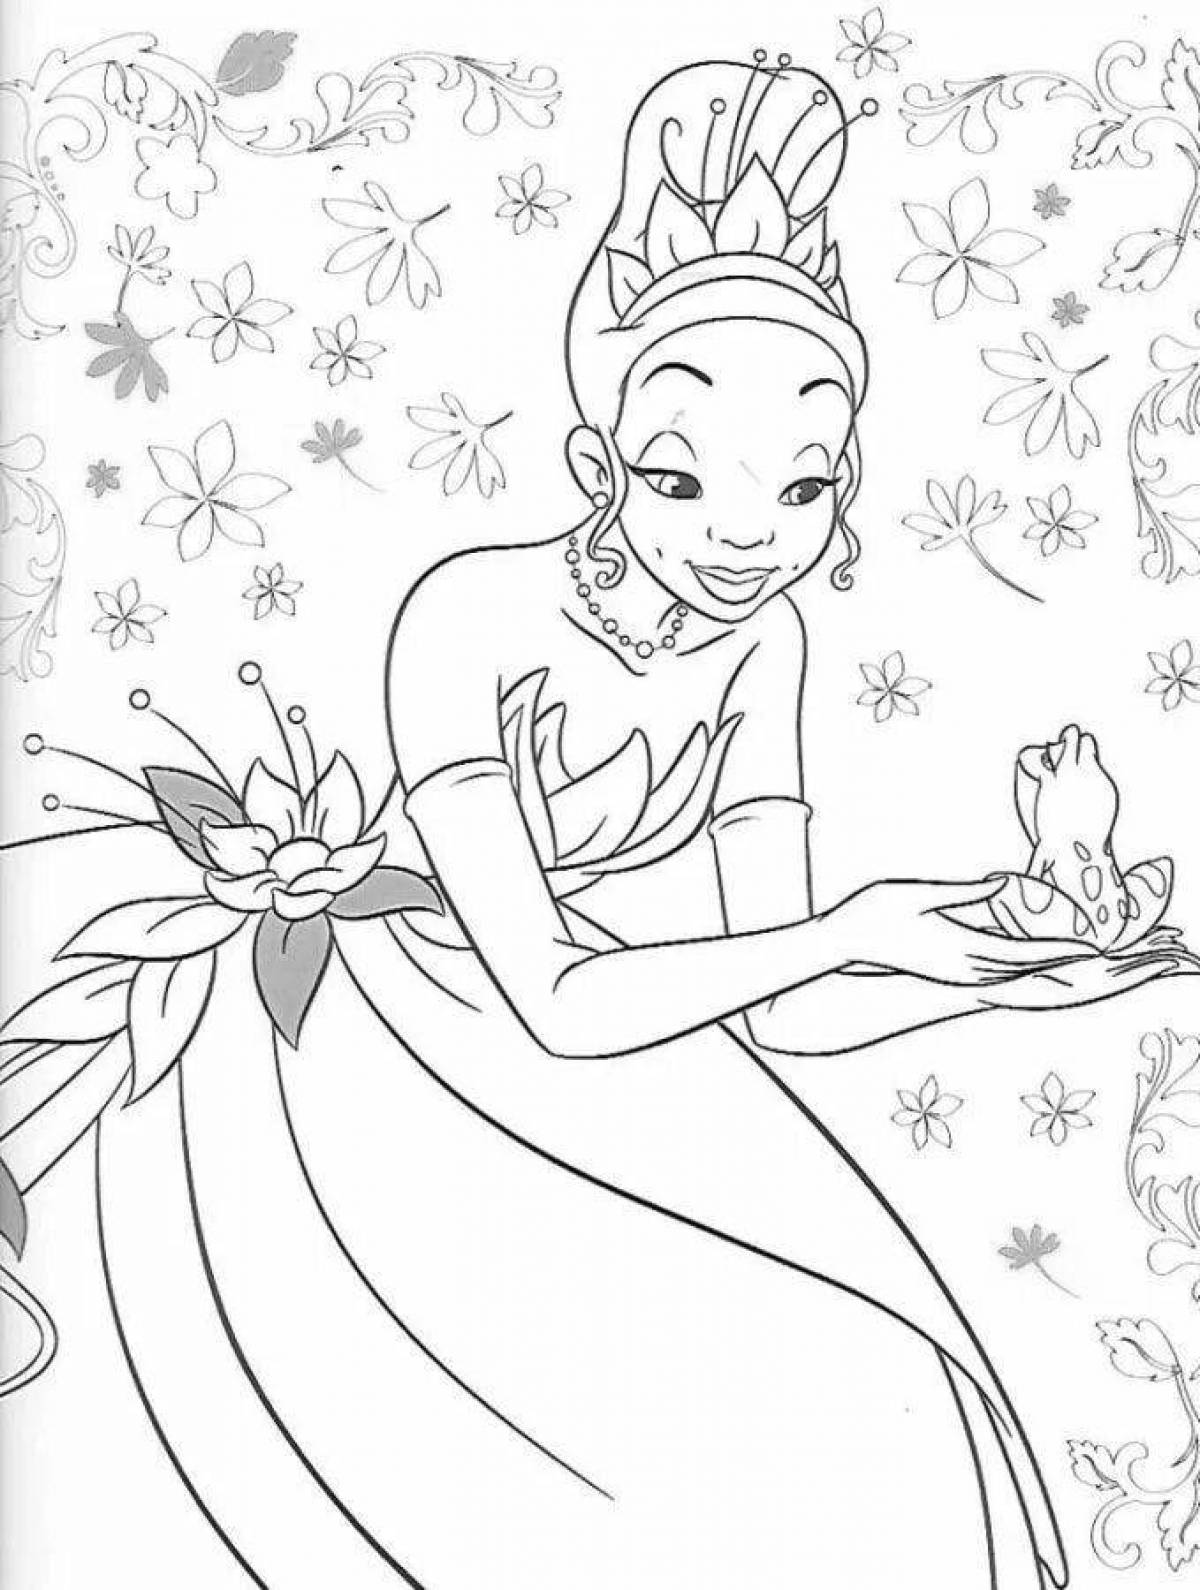 Tiana's amazing coloring page